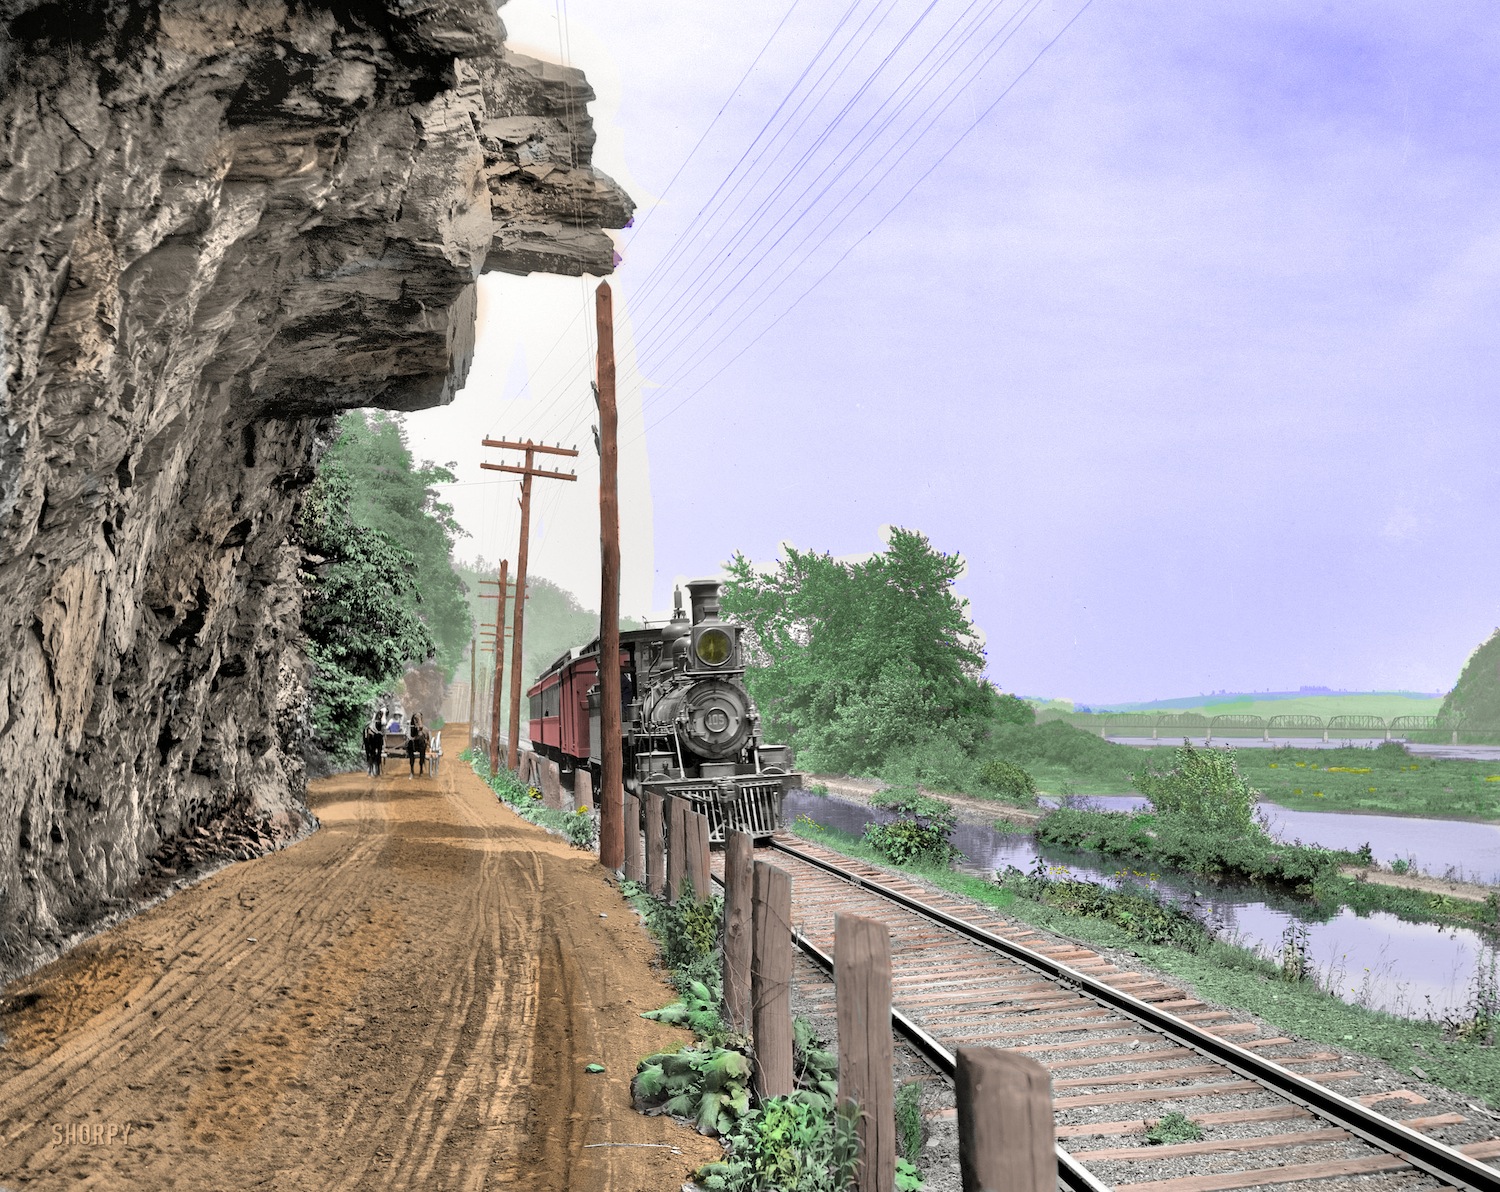 Danville Pa 1901. Another great pic on Shorpy. View full size.